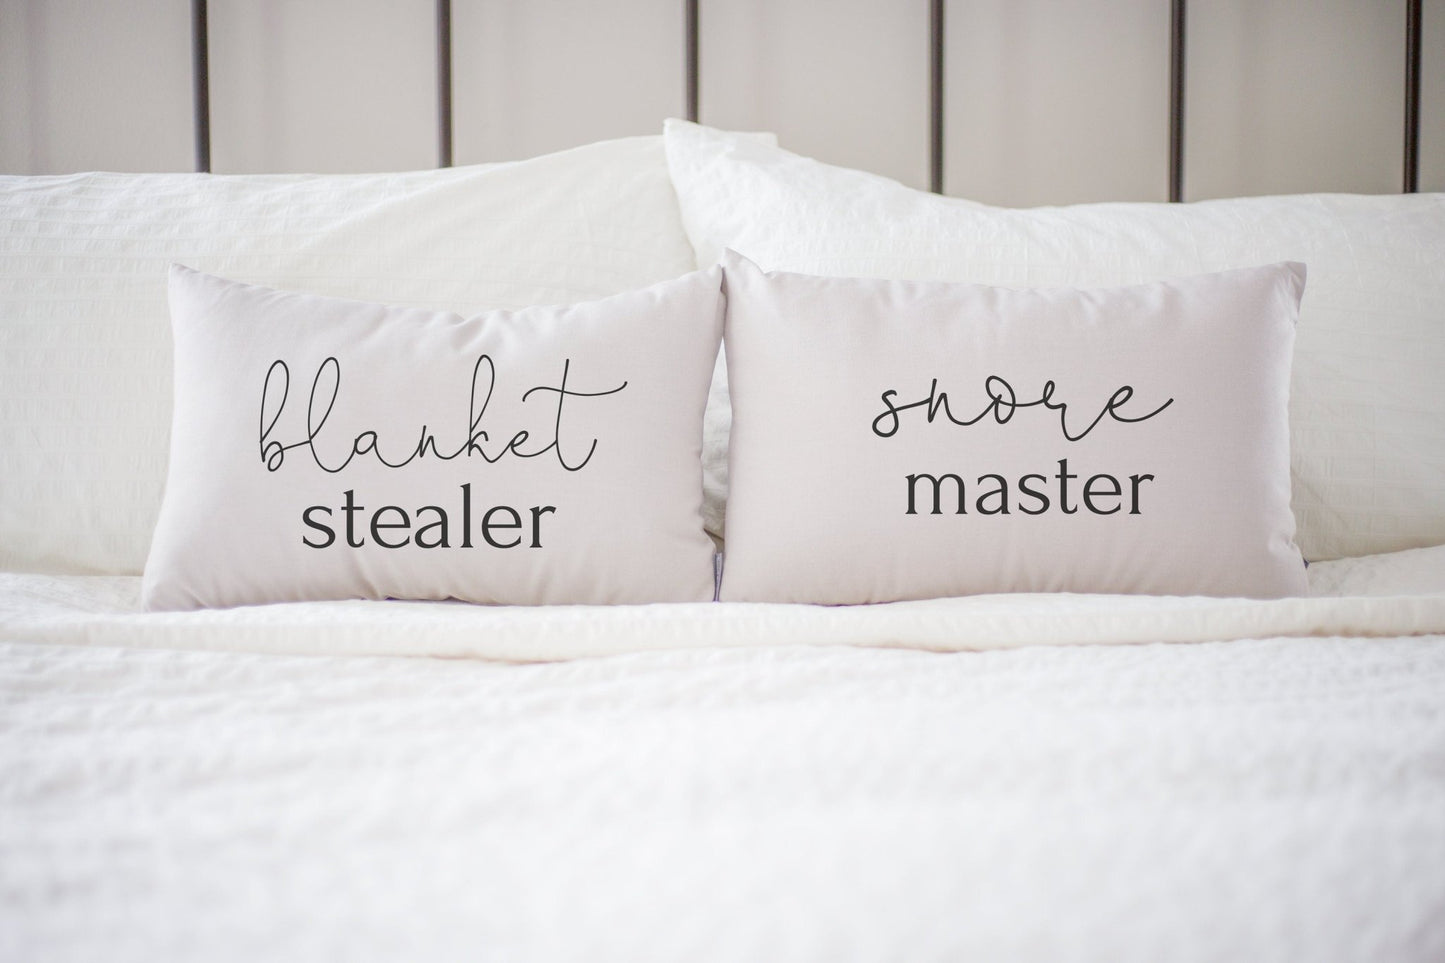 Load image into Gallery viewer, Blanket Stealer Snore Master Pillow Set Bachelorette Party Gift | Humor Gift for Spouse Gift Wedding Gift Funny | Valentine Gift for Husband - Sweet Hooligans Design
